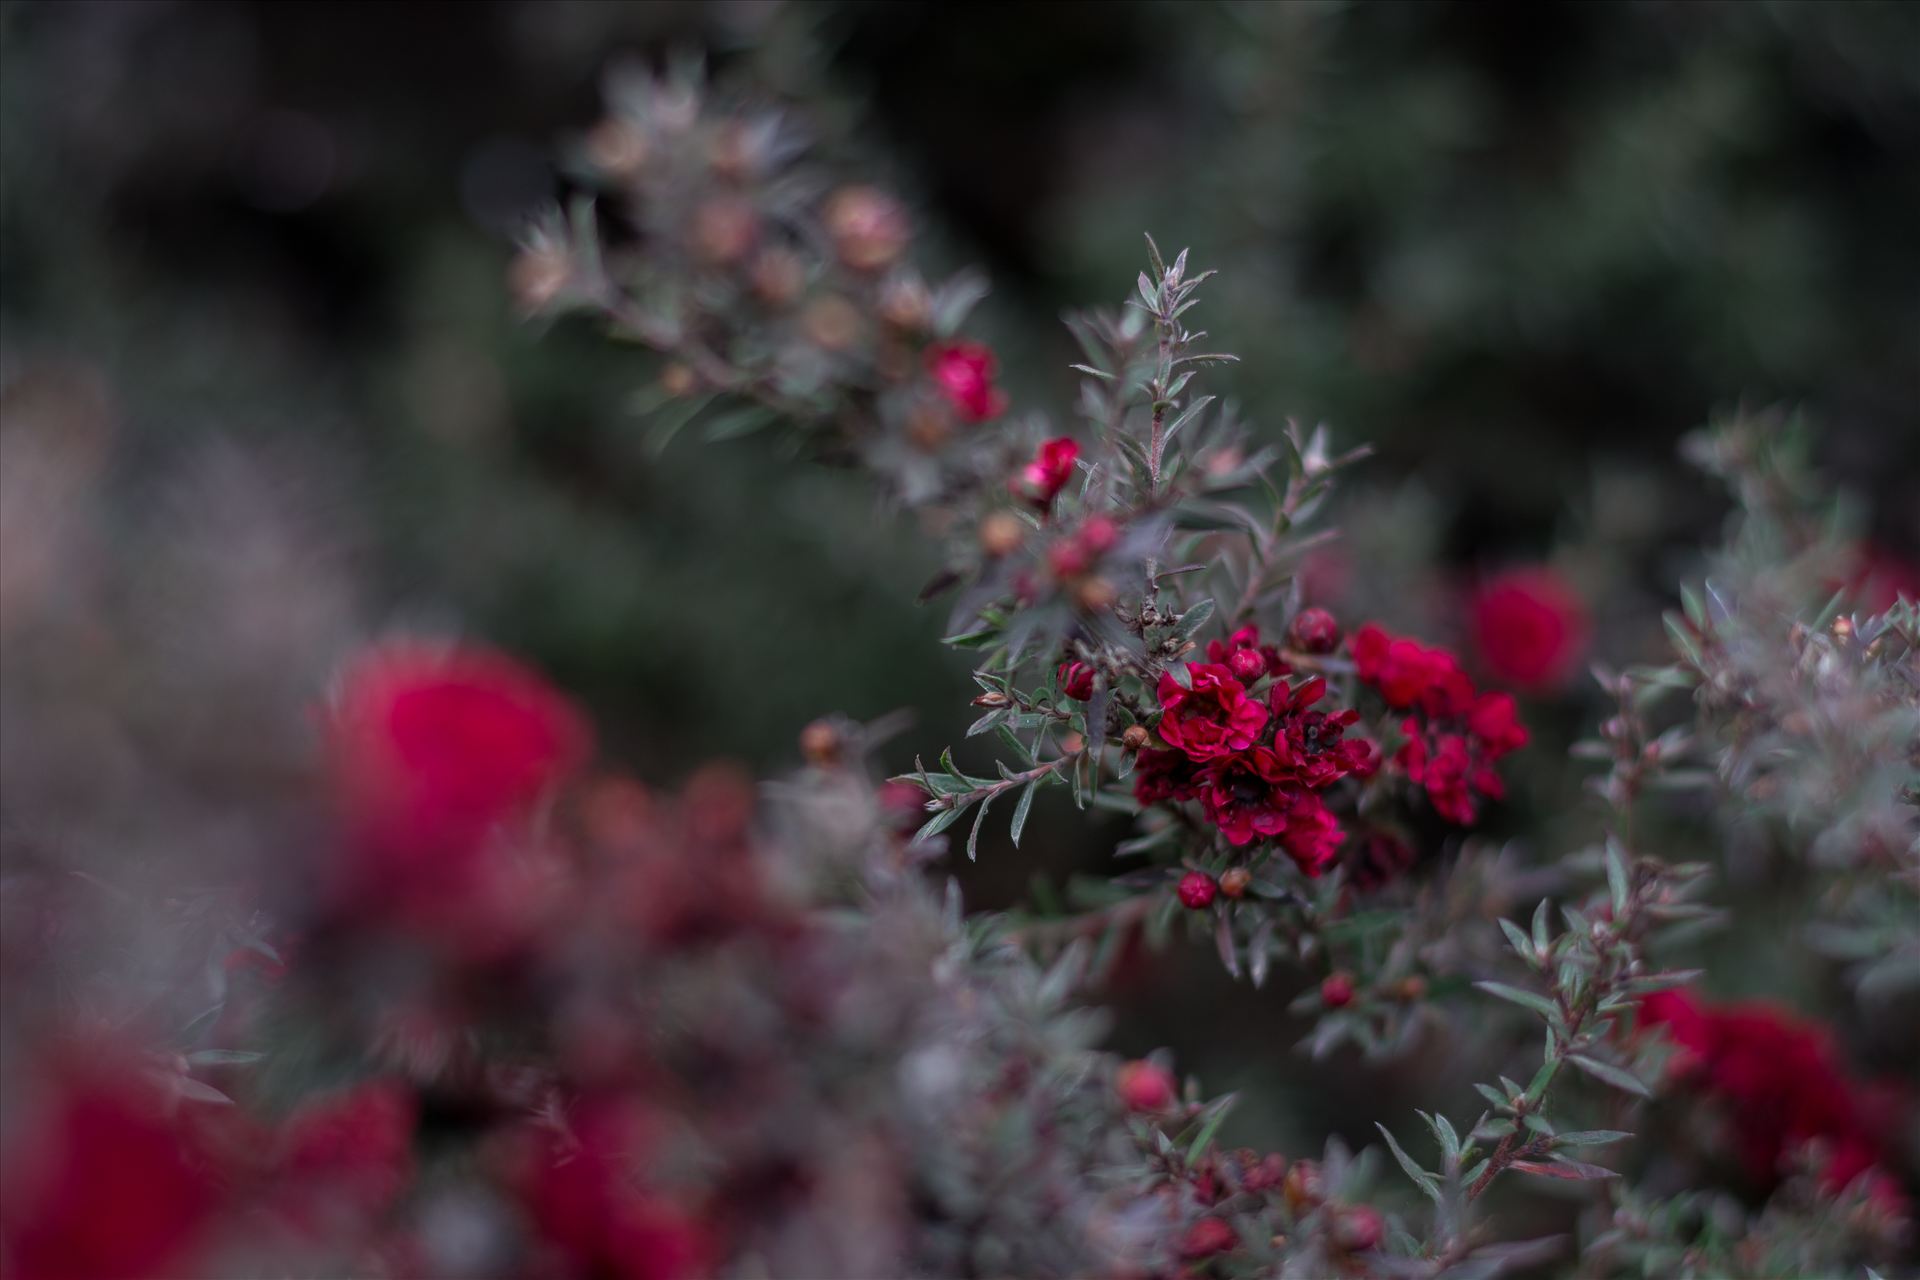 Red Blossoms Bokeh 2 10252015.jpg Winter is on the way, Christmas is around the corner. by Sarah Williams